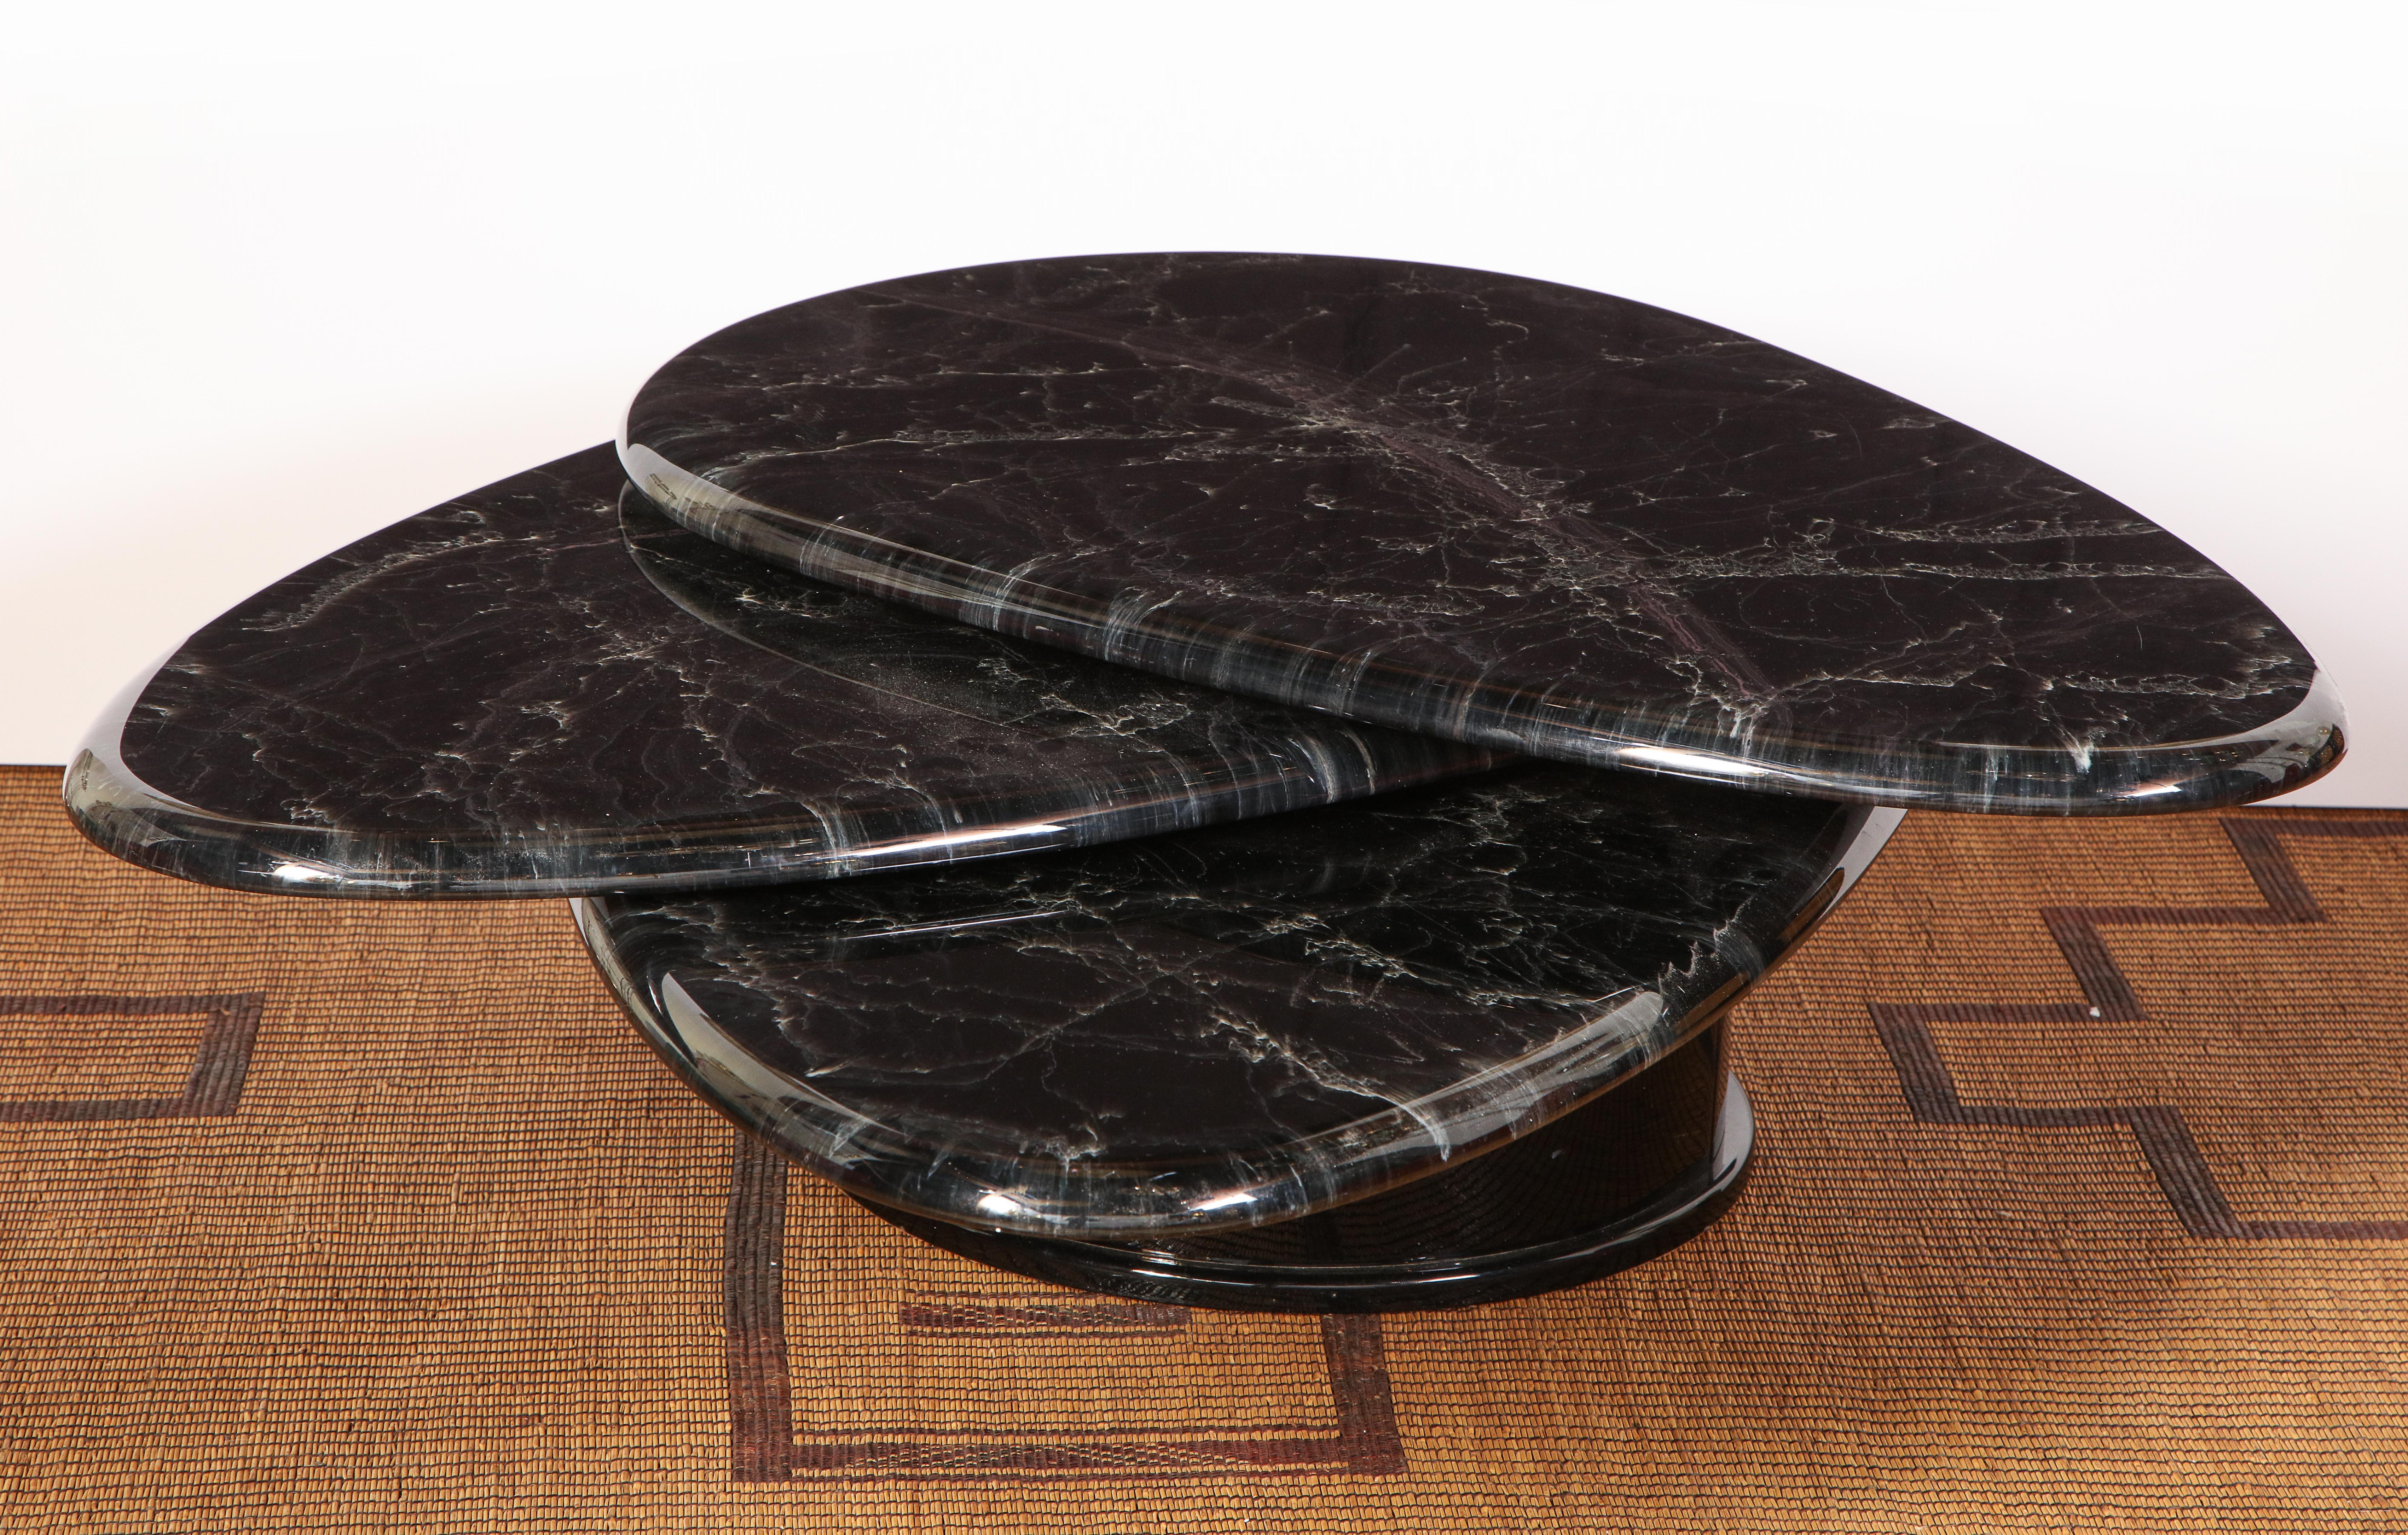 Black lacquered teardrop swivel coffee table attributed to Roger Rougier, circa 1980s. What makes this table unique and rare is the marbled top which is actually hand painted and lacquered and is virtually indistinguishable from real marble. The top